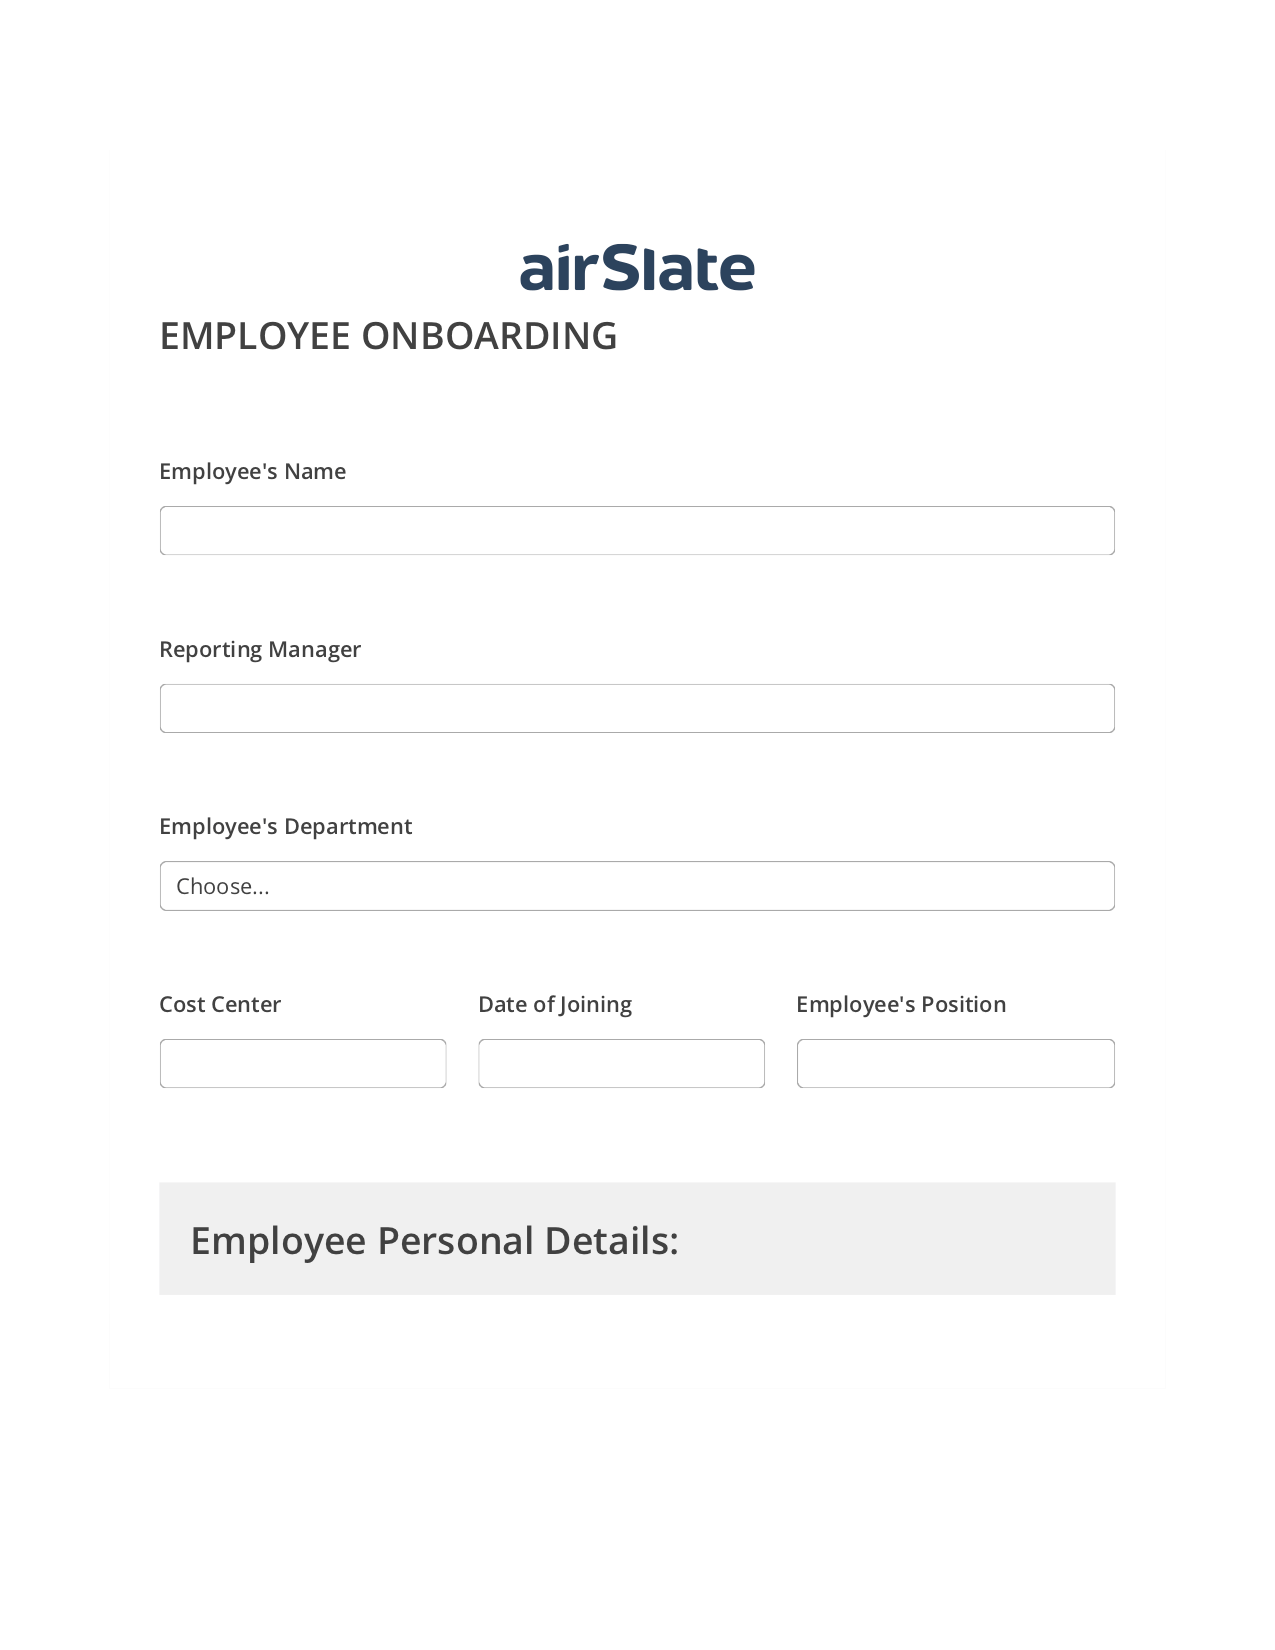 Employee Onboarding Workflow Pre-fill from Excel Spreadsheet Dropdown Options Bot, Add Tags to Slate Bot, Export to WebMerge Bot